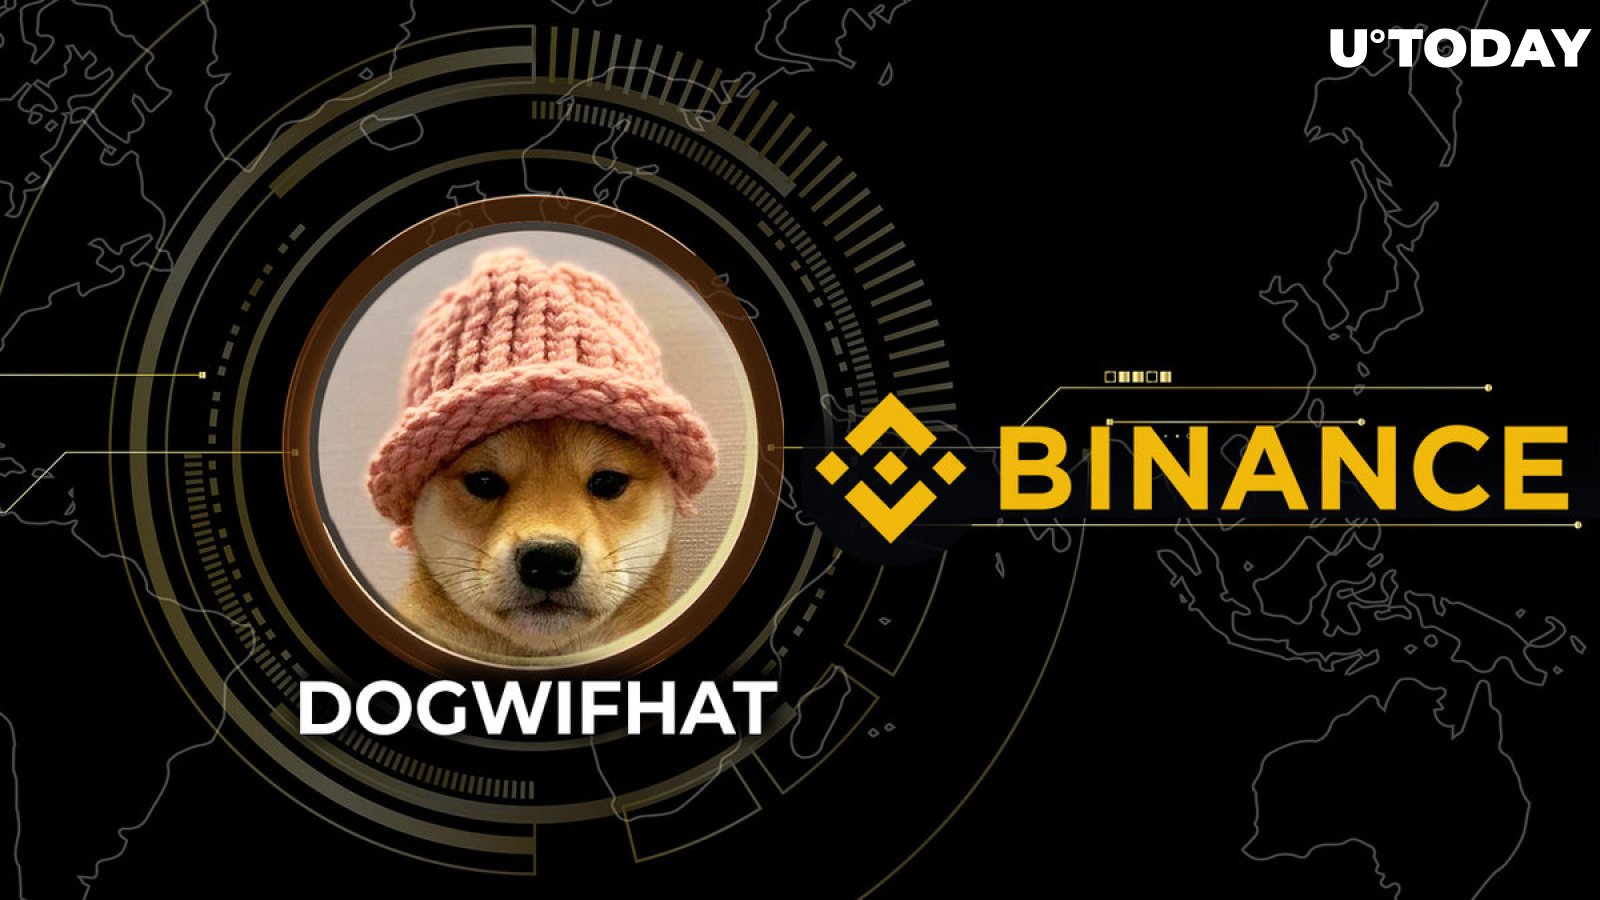 Dogwifhat (WIF) Mysterious Buying Activity Ahead of Binance Listing: What's Happening?